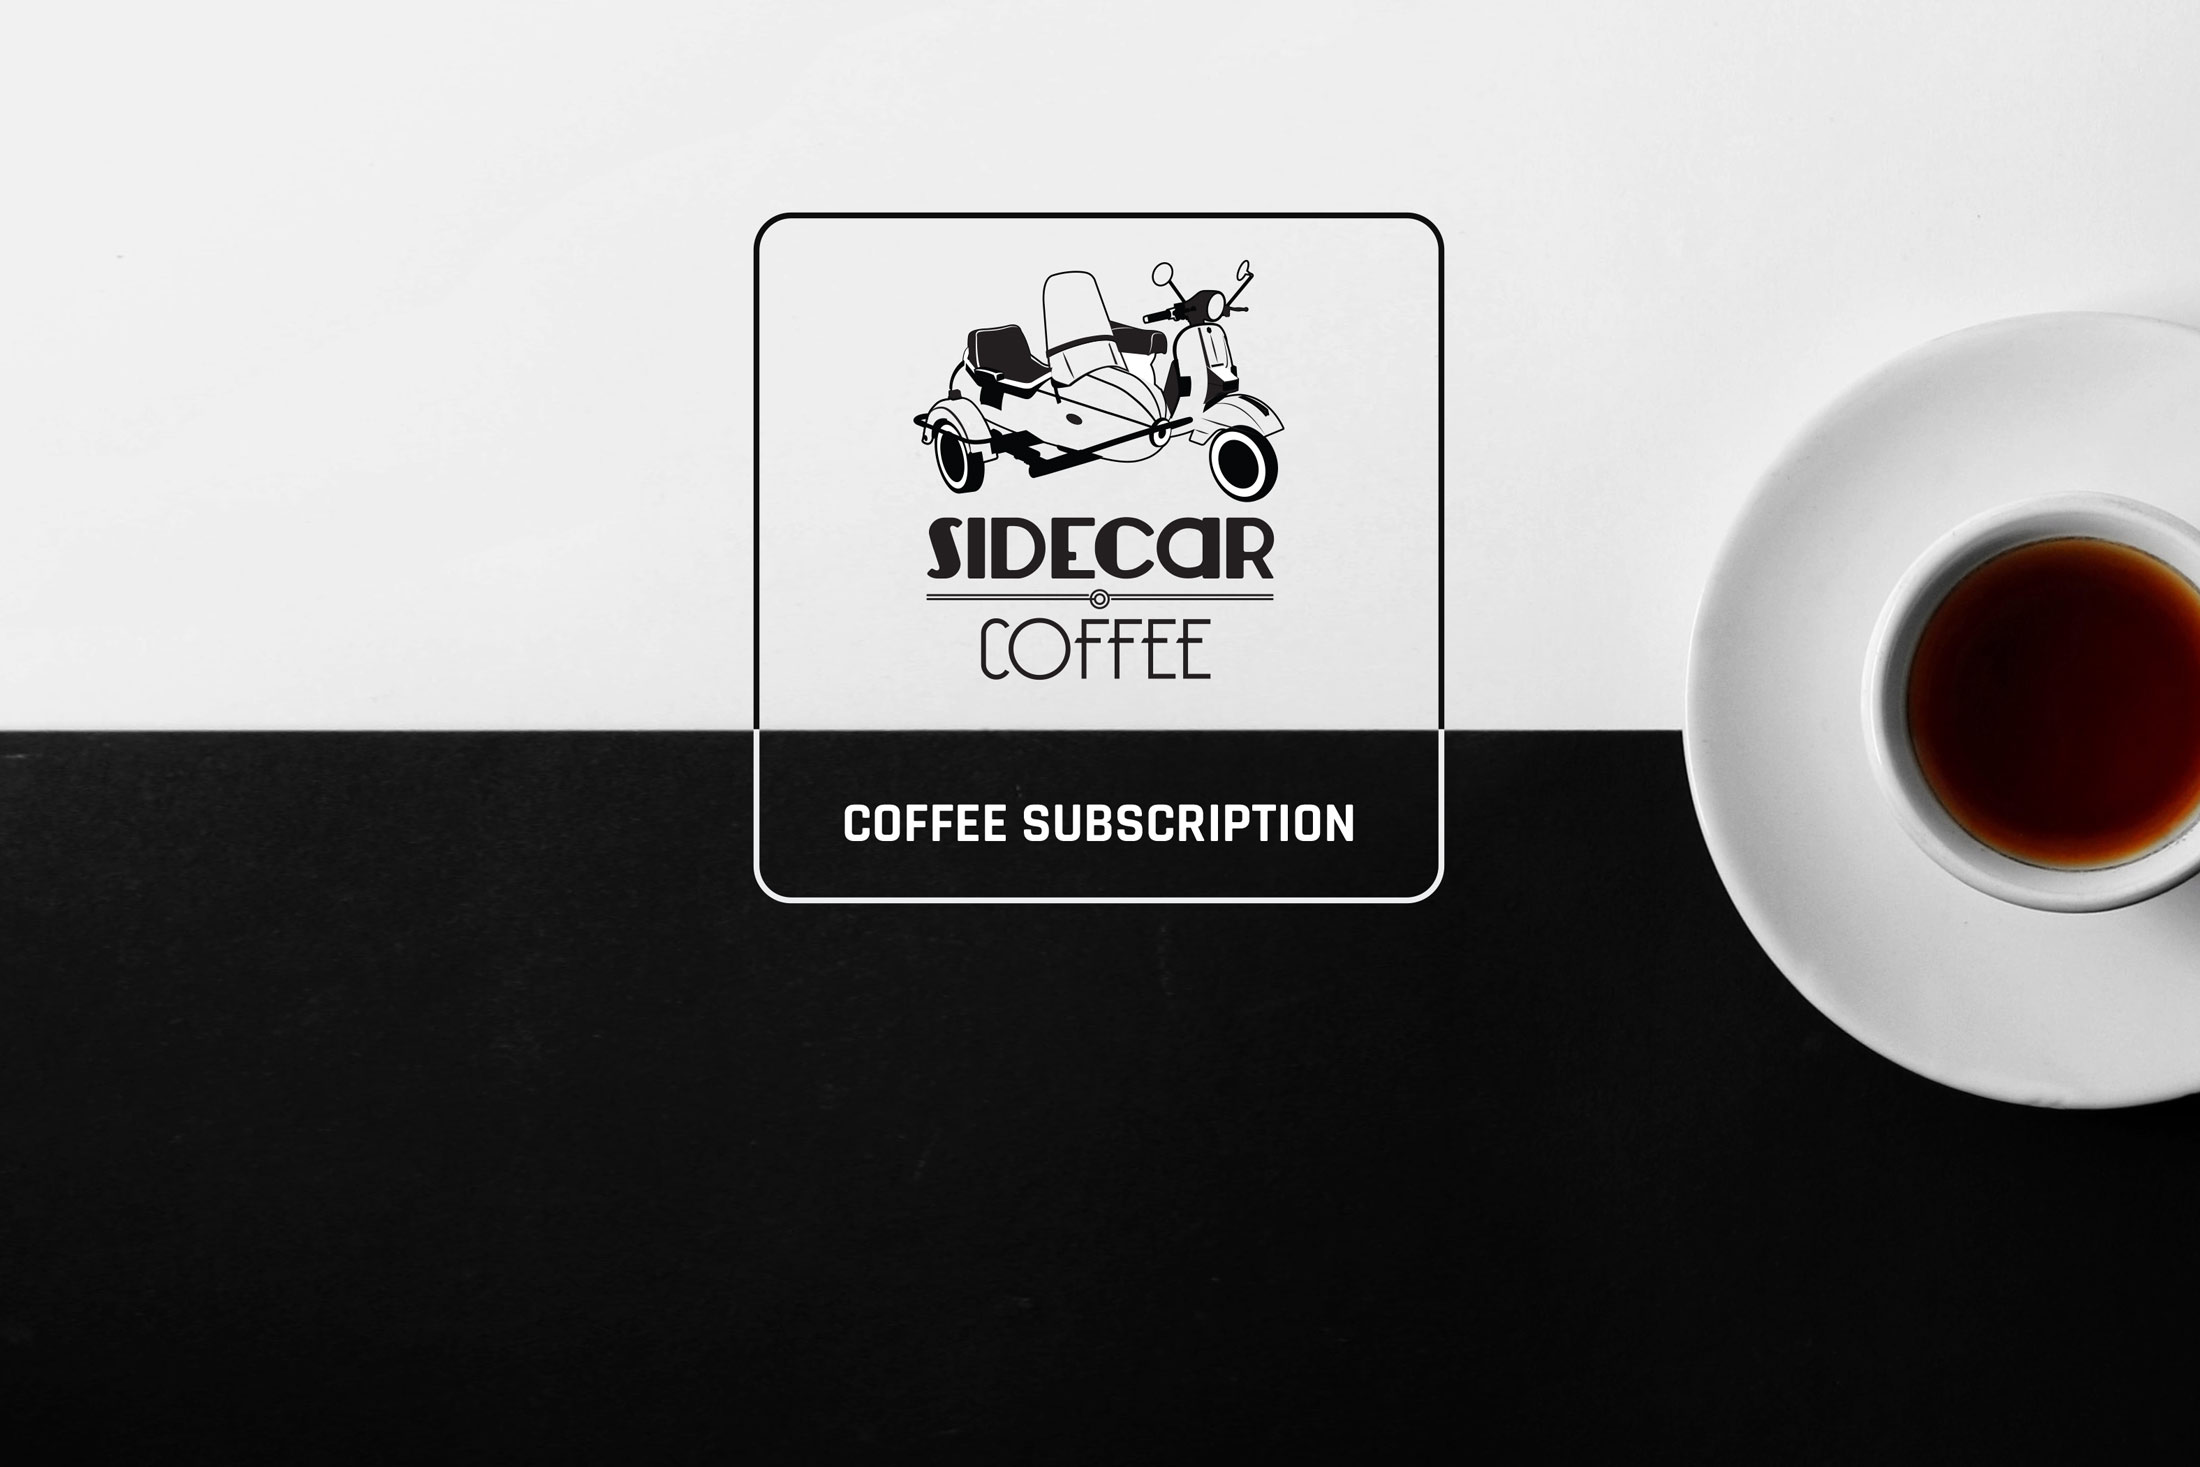 https://www.sidecarcoffee.com/wp-content/uploads/2020/03/Sidecar-Coffee-Subscription-Hero-Image.jpg